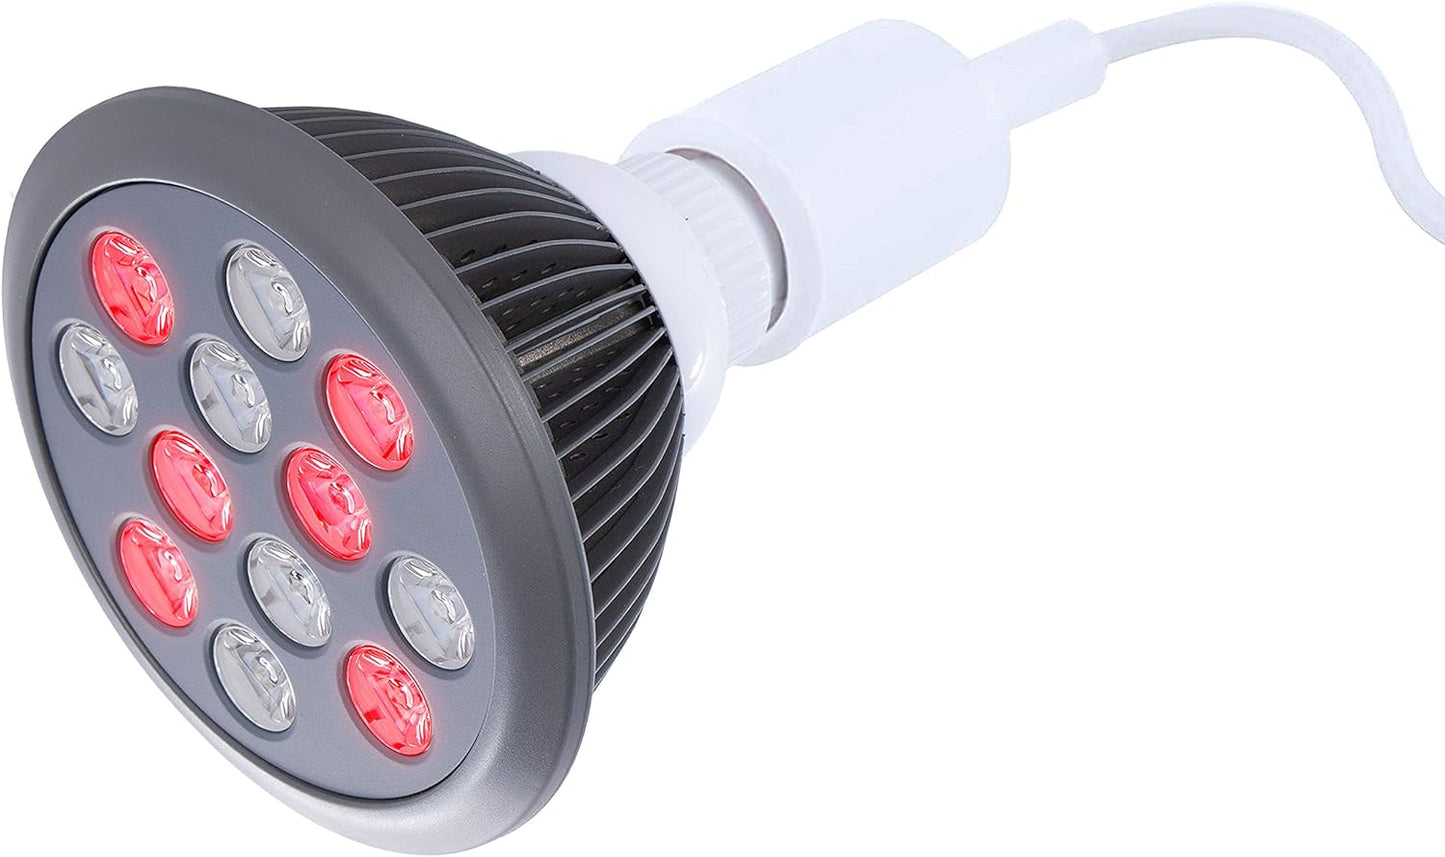 12 LEDs Light Therapy Bulb 415 nm Wavelength High Irradiance Treatment for Acne and Sun Damage Skin Texture and Tigthen Skin